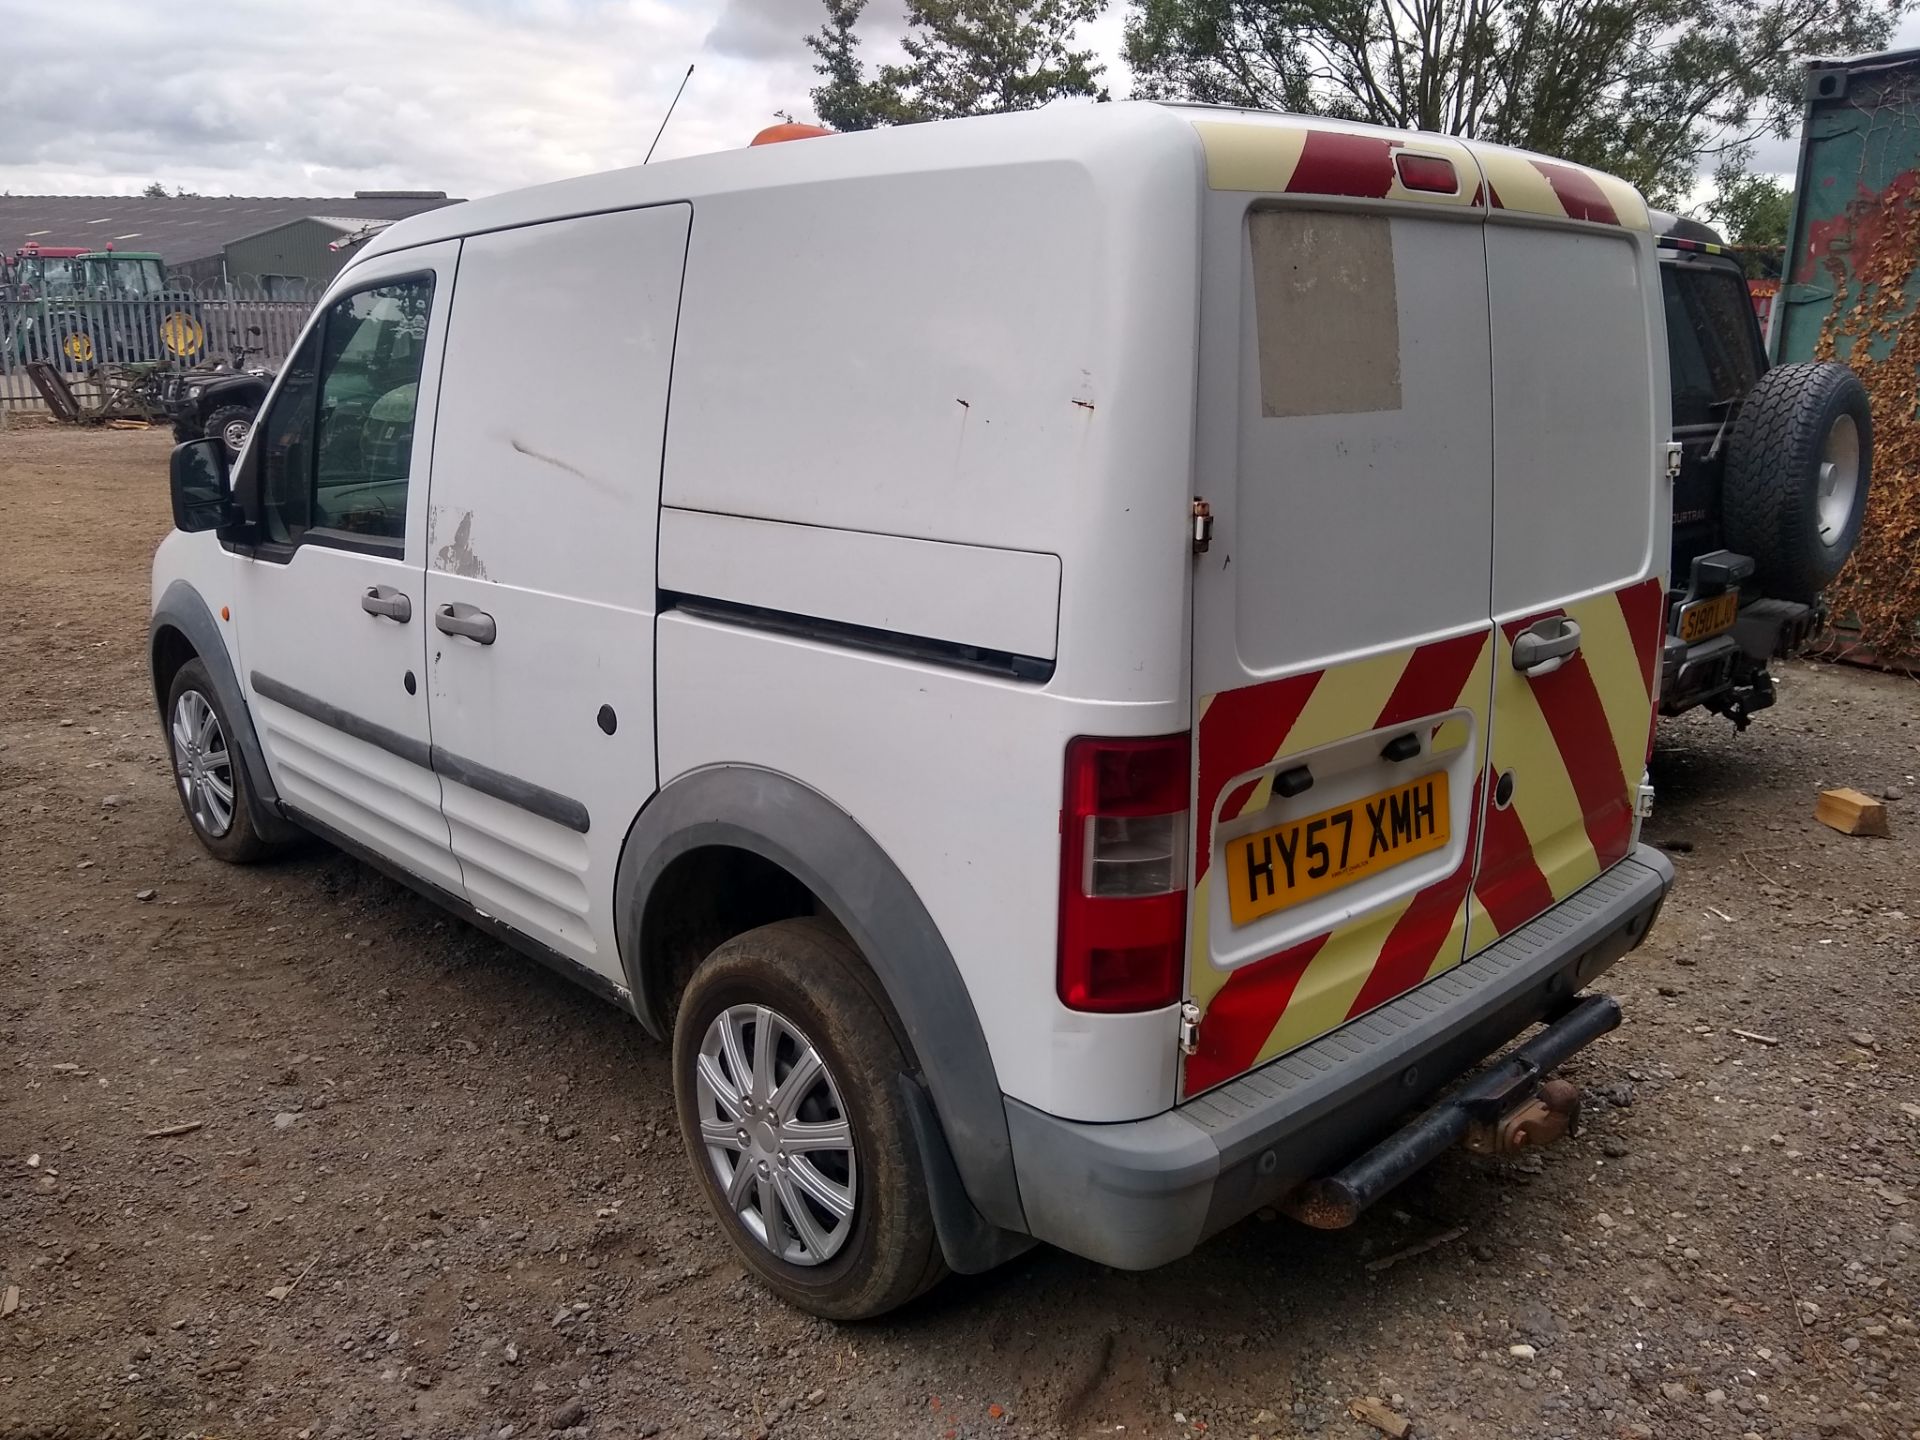 2007 Ford Transit Connect 1.8 Diesel Van, HY57XMH - Image 7 of 8